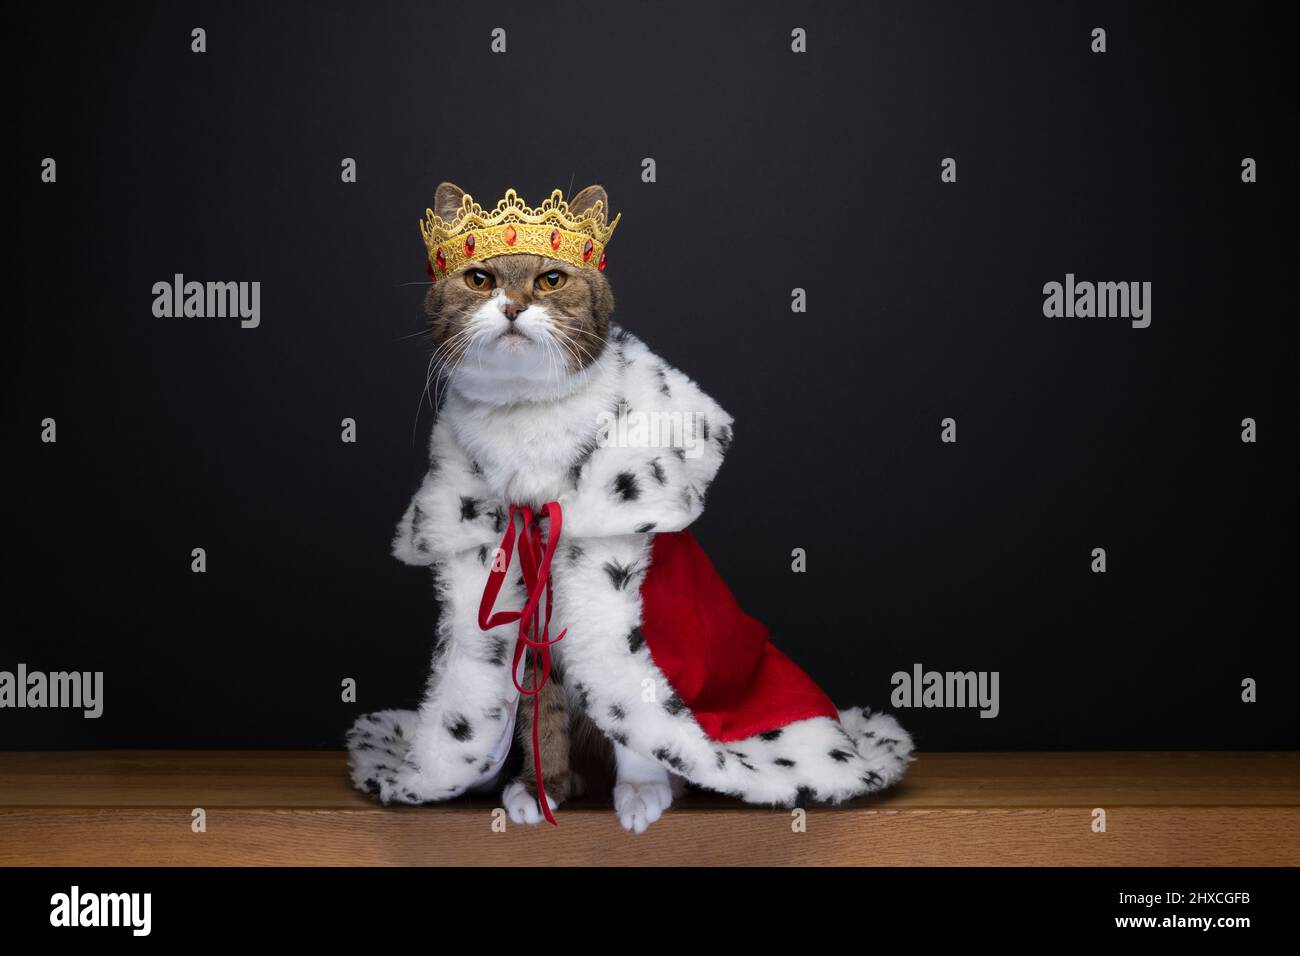 cute cat wearing royal kitty king outfit costume with golden crown and red ermine coat on black background with copy space Stock Photo